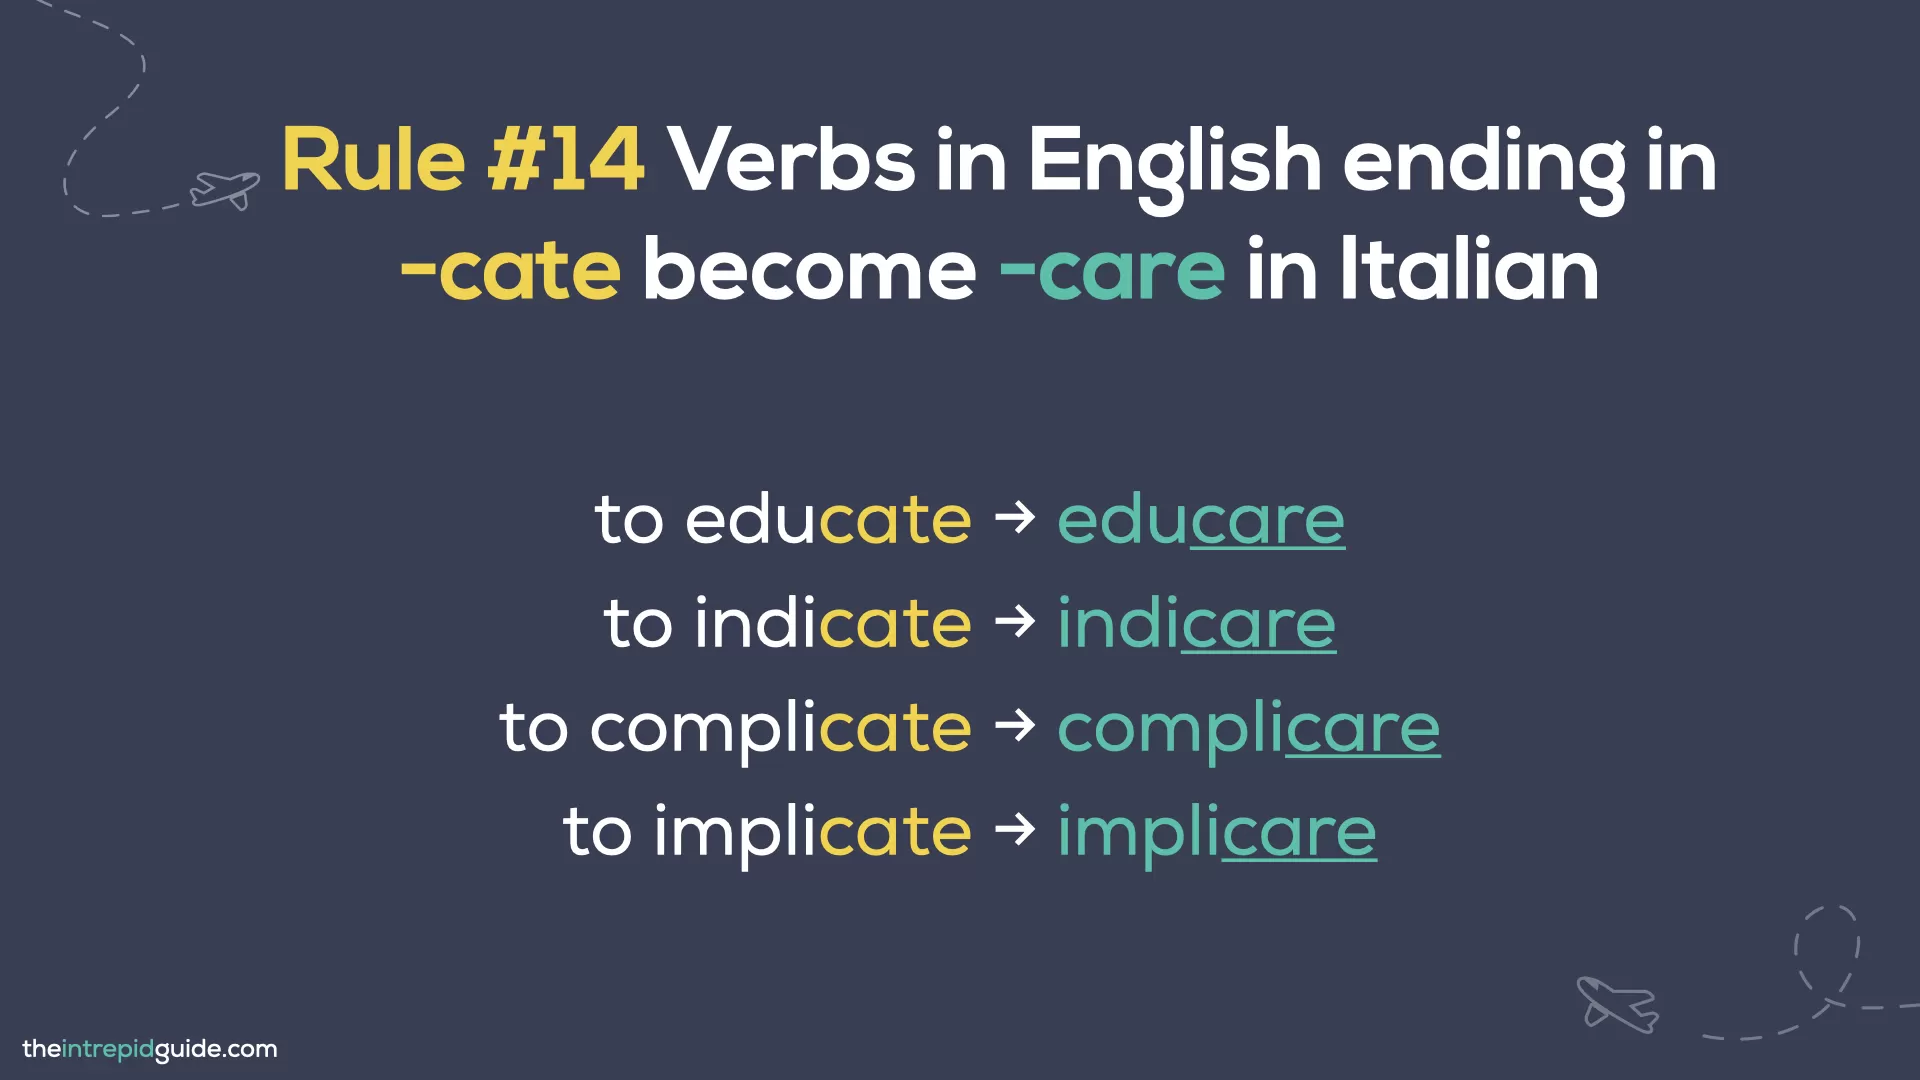 Italian cognates and loan words - Rule 14 - Verbs in English ending in -cate become -care in Italian